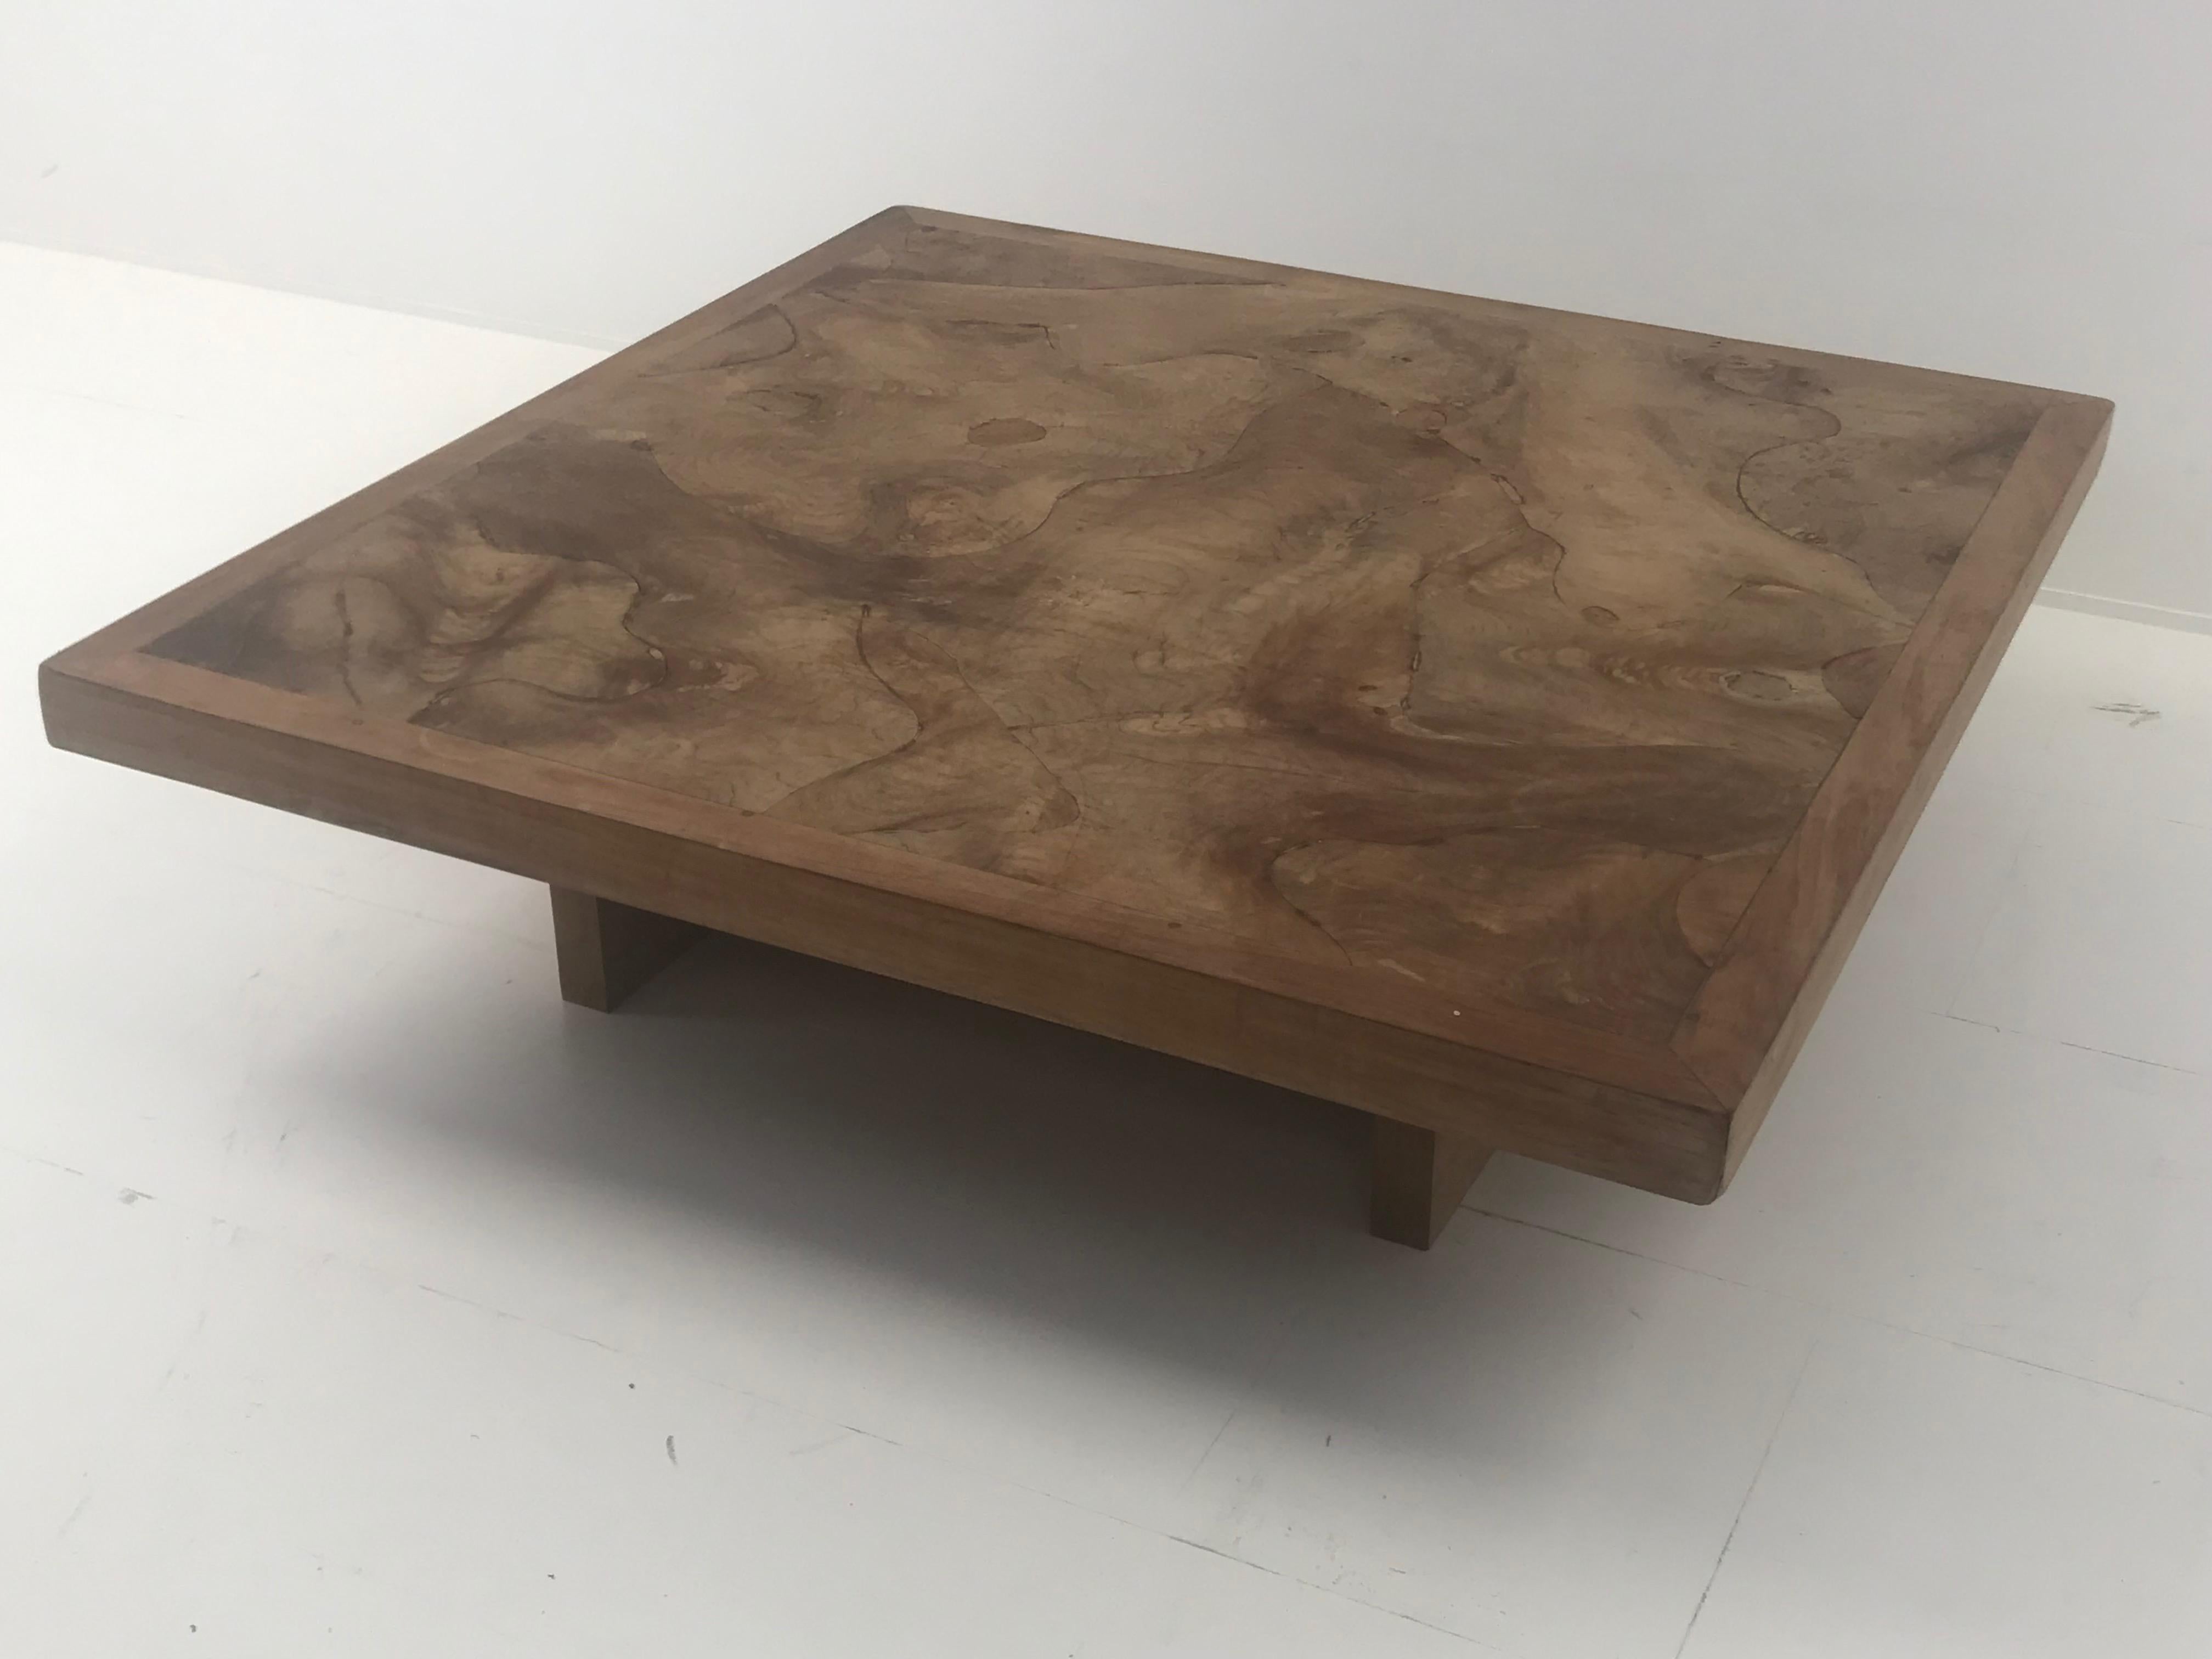 Exceptional quadrangular coffee table in teak wood, root of the tree with charming details of wood structure
modern wooden base.